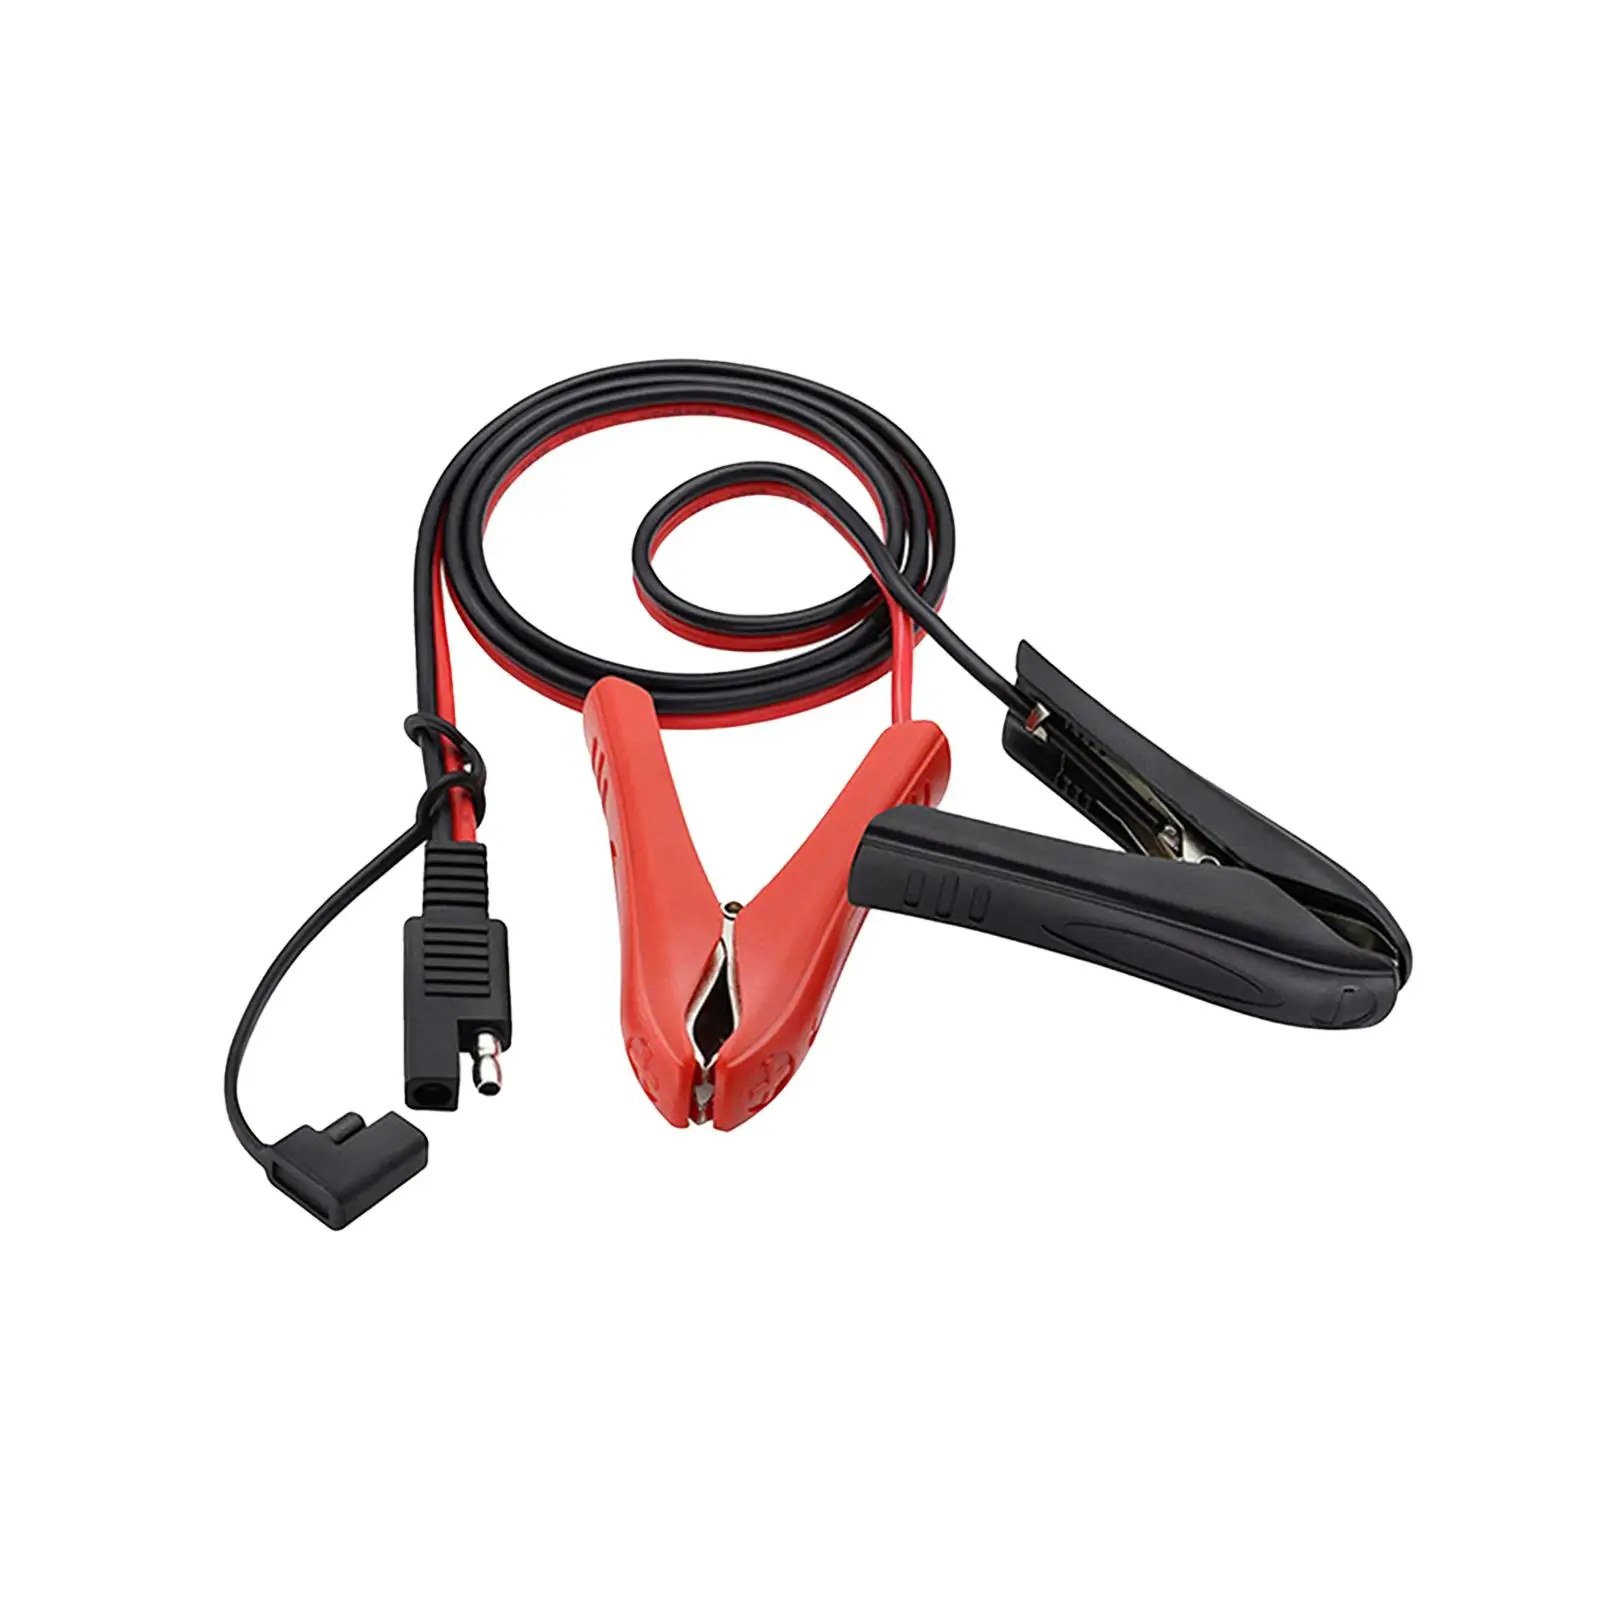 SAE to Alligator Clip Power Cord Quick Disconnect for Vehicle Motorbike